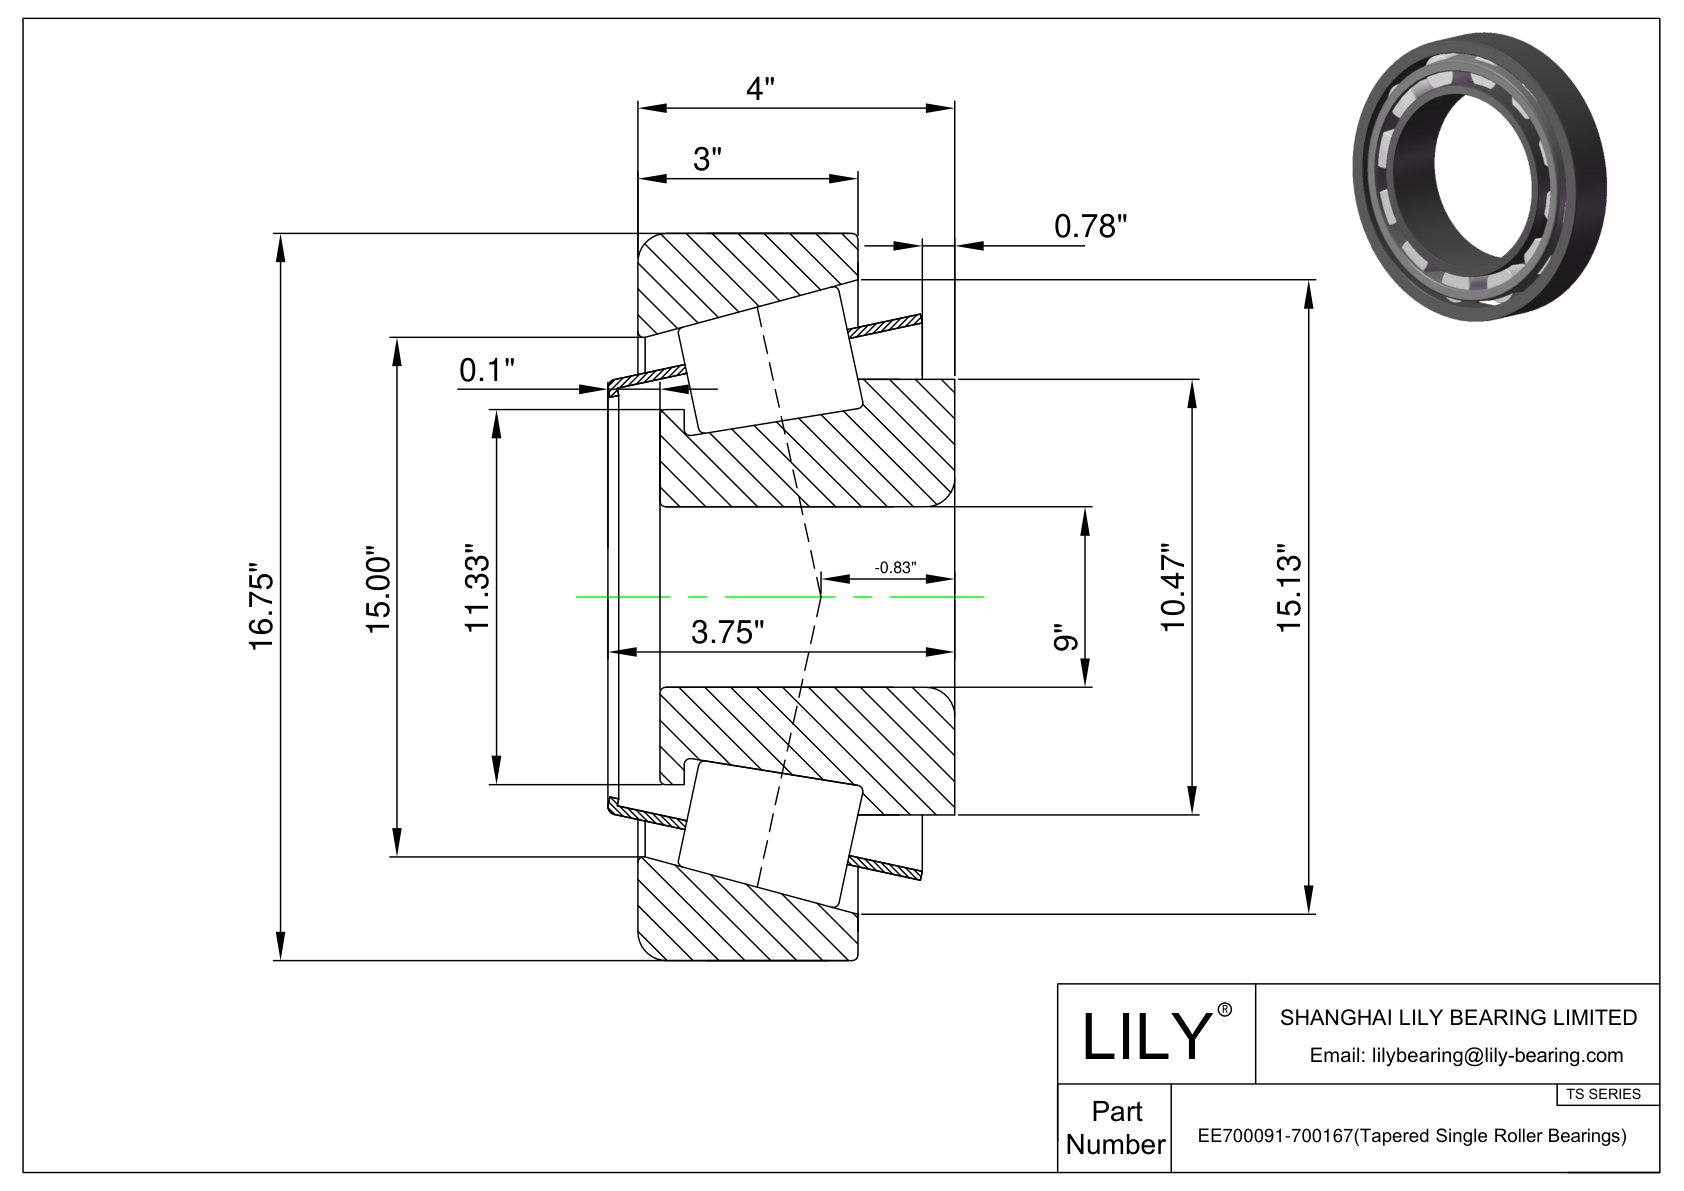 EE700091-700167 TS (Tapered Single Roller Bearings) (Imperial) cad drawing